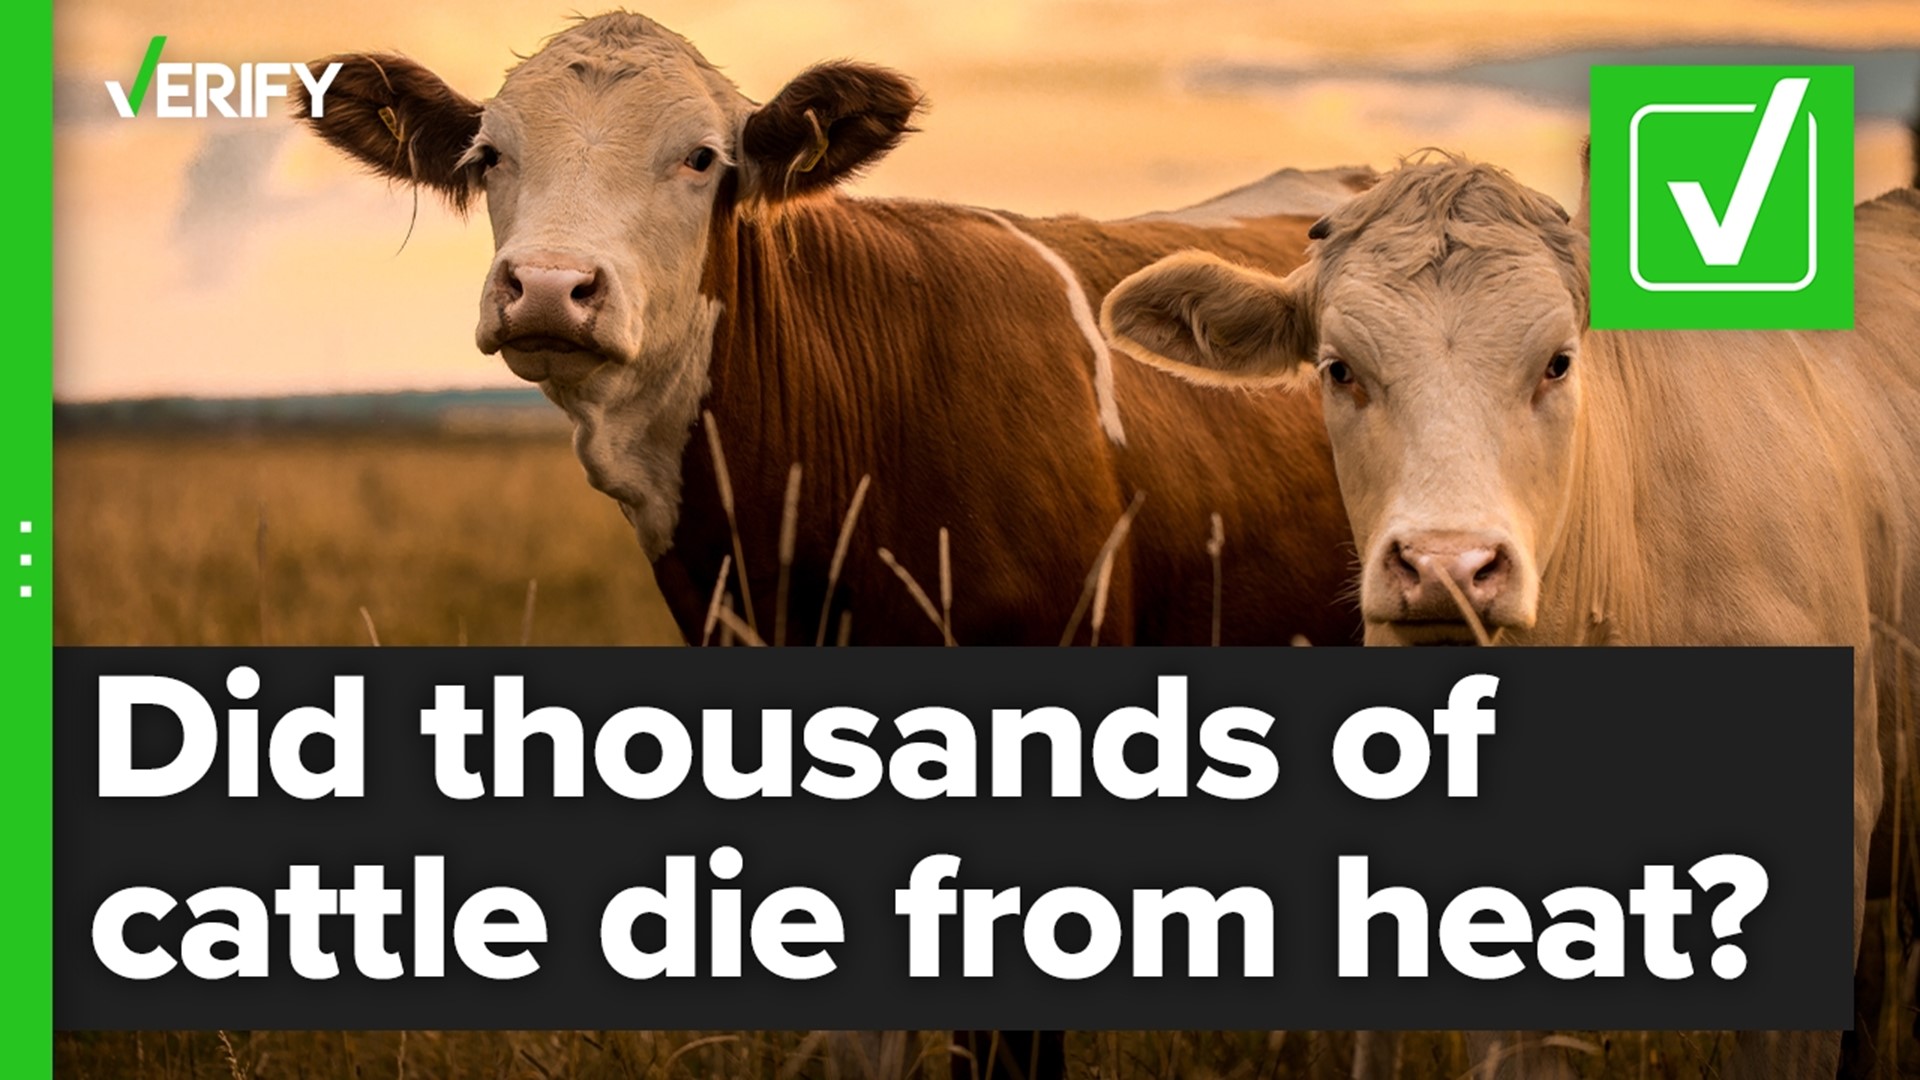 Did heat lead to the deaths of thousands of cattle in Kansas? The VERIFY team confirms this is true.